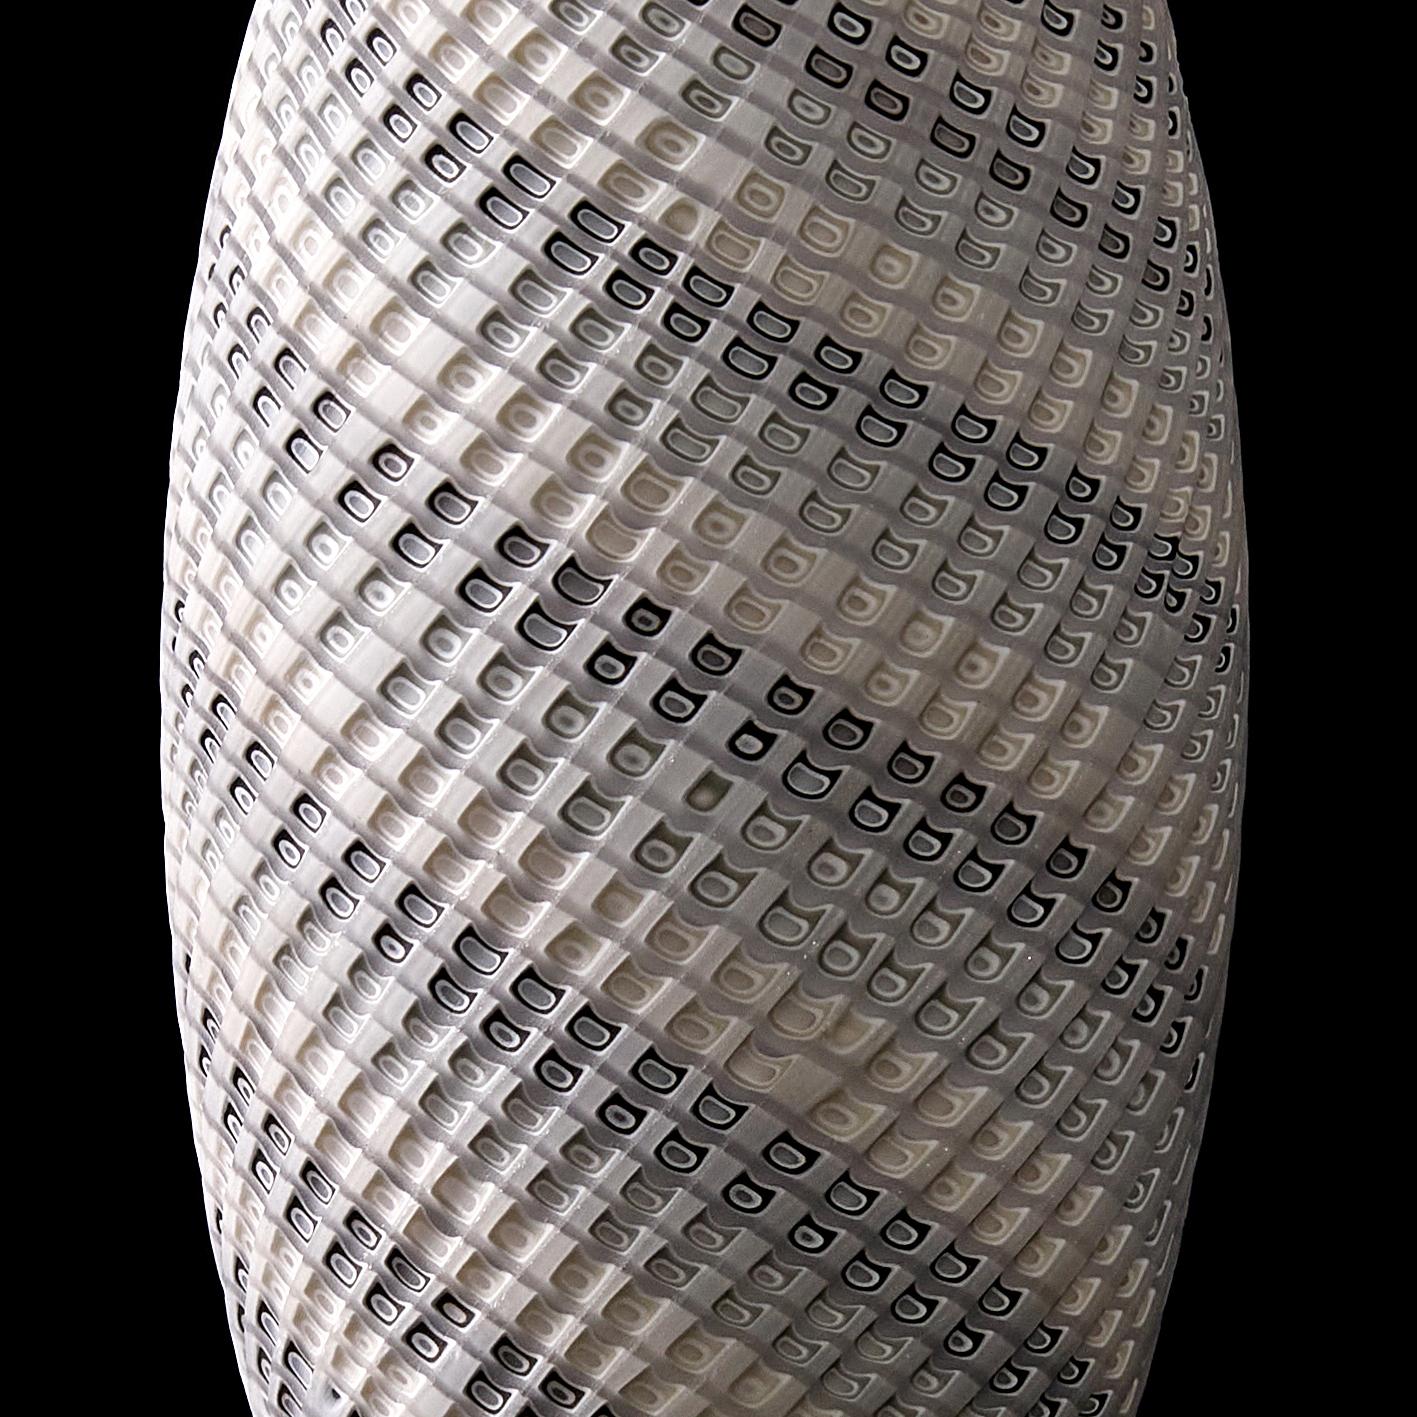 Contemporary Woven Two-Tone White Pair, an Organic Textured Art Glass Duo by Layne Row